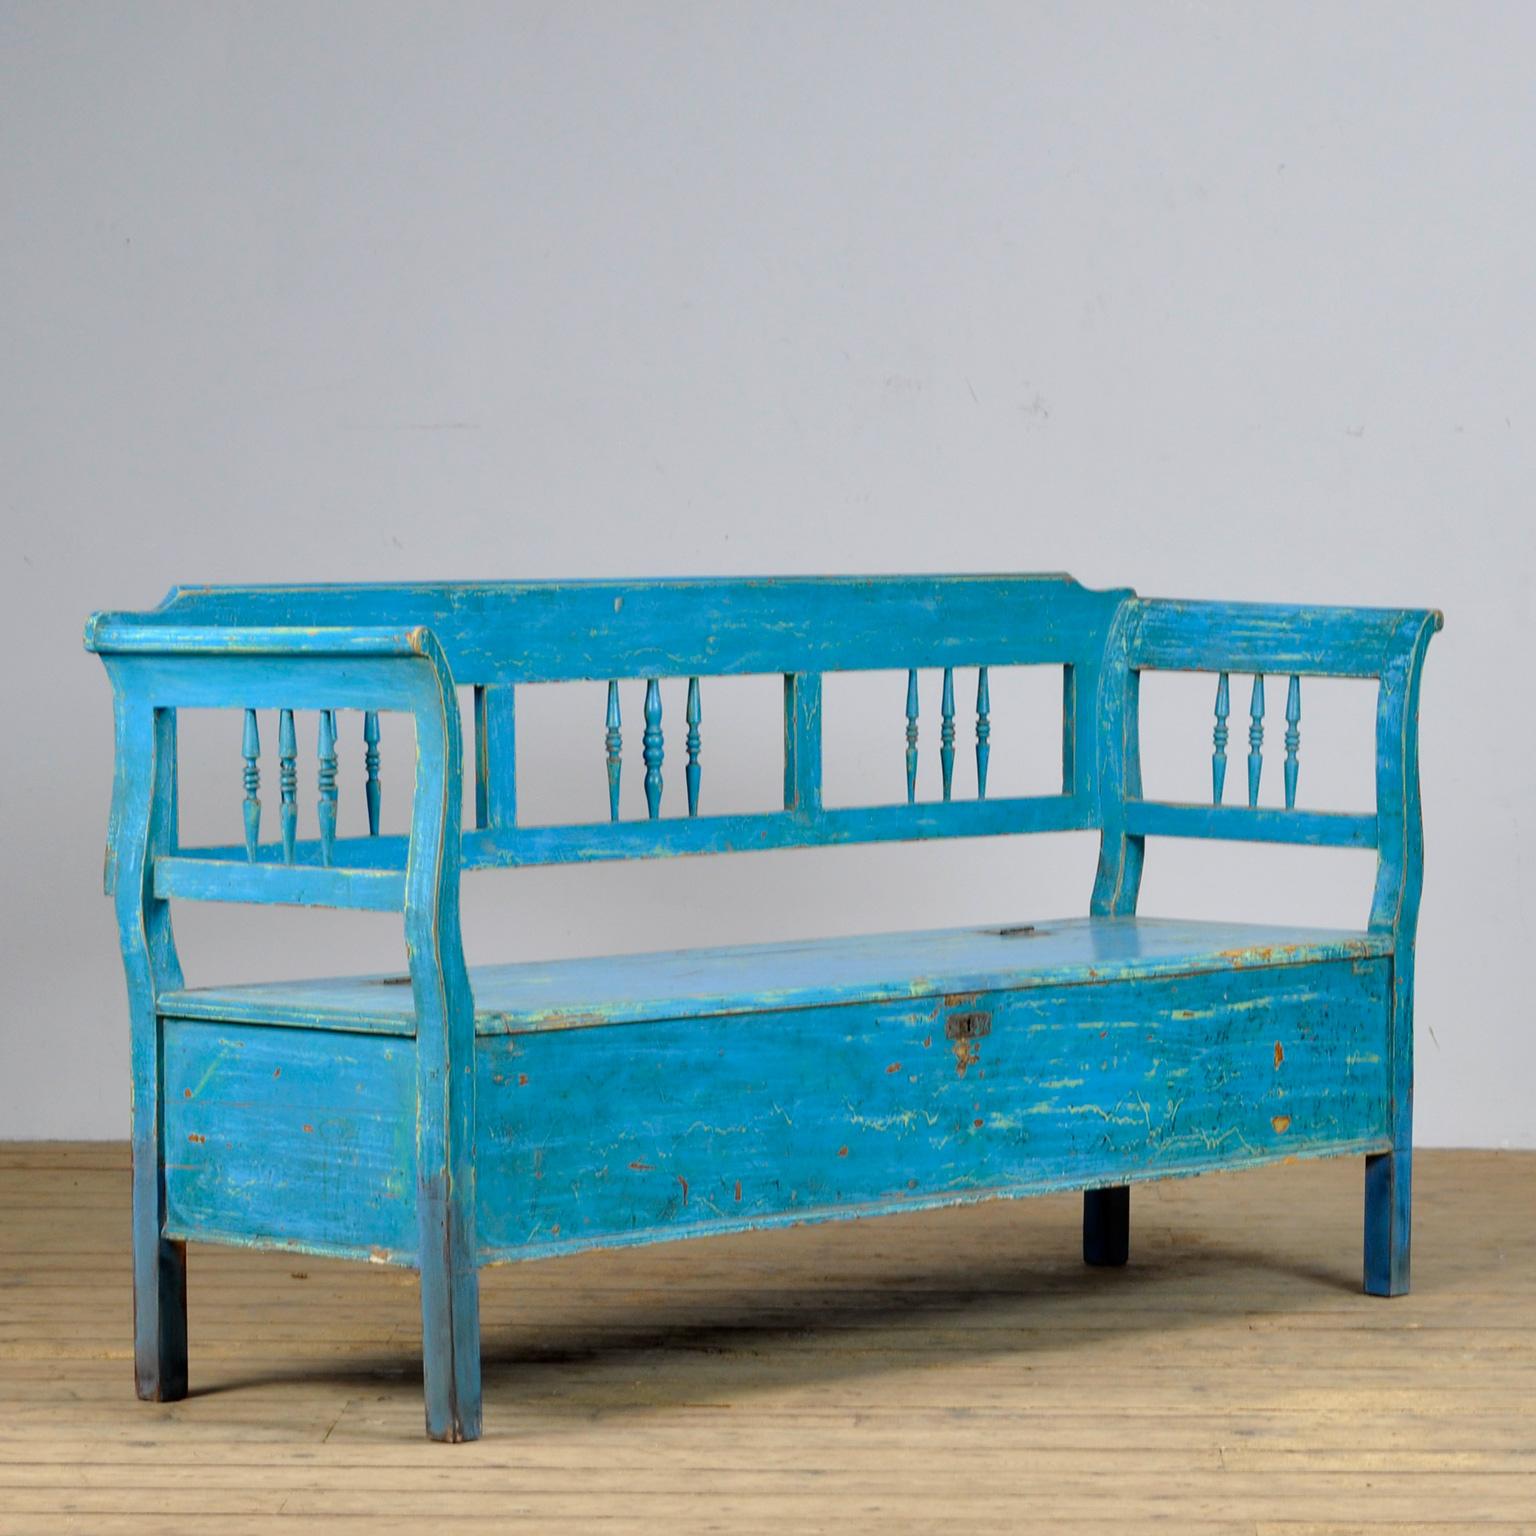 A charming bench from Hungary with the original paint. Over time and use, the blue paint has been worn away in places to the wood. With storage space under the seat. The bench is stable and sturdy. Free of woodworm.